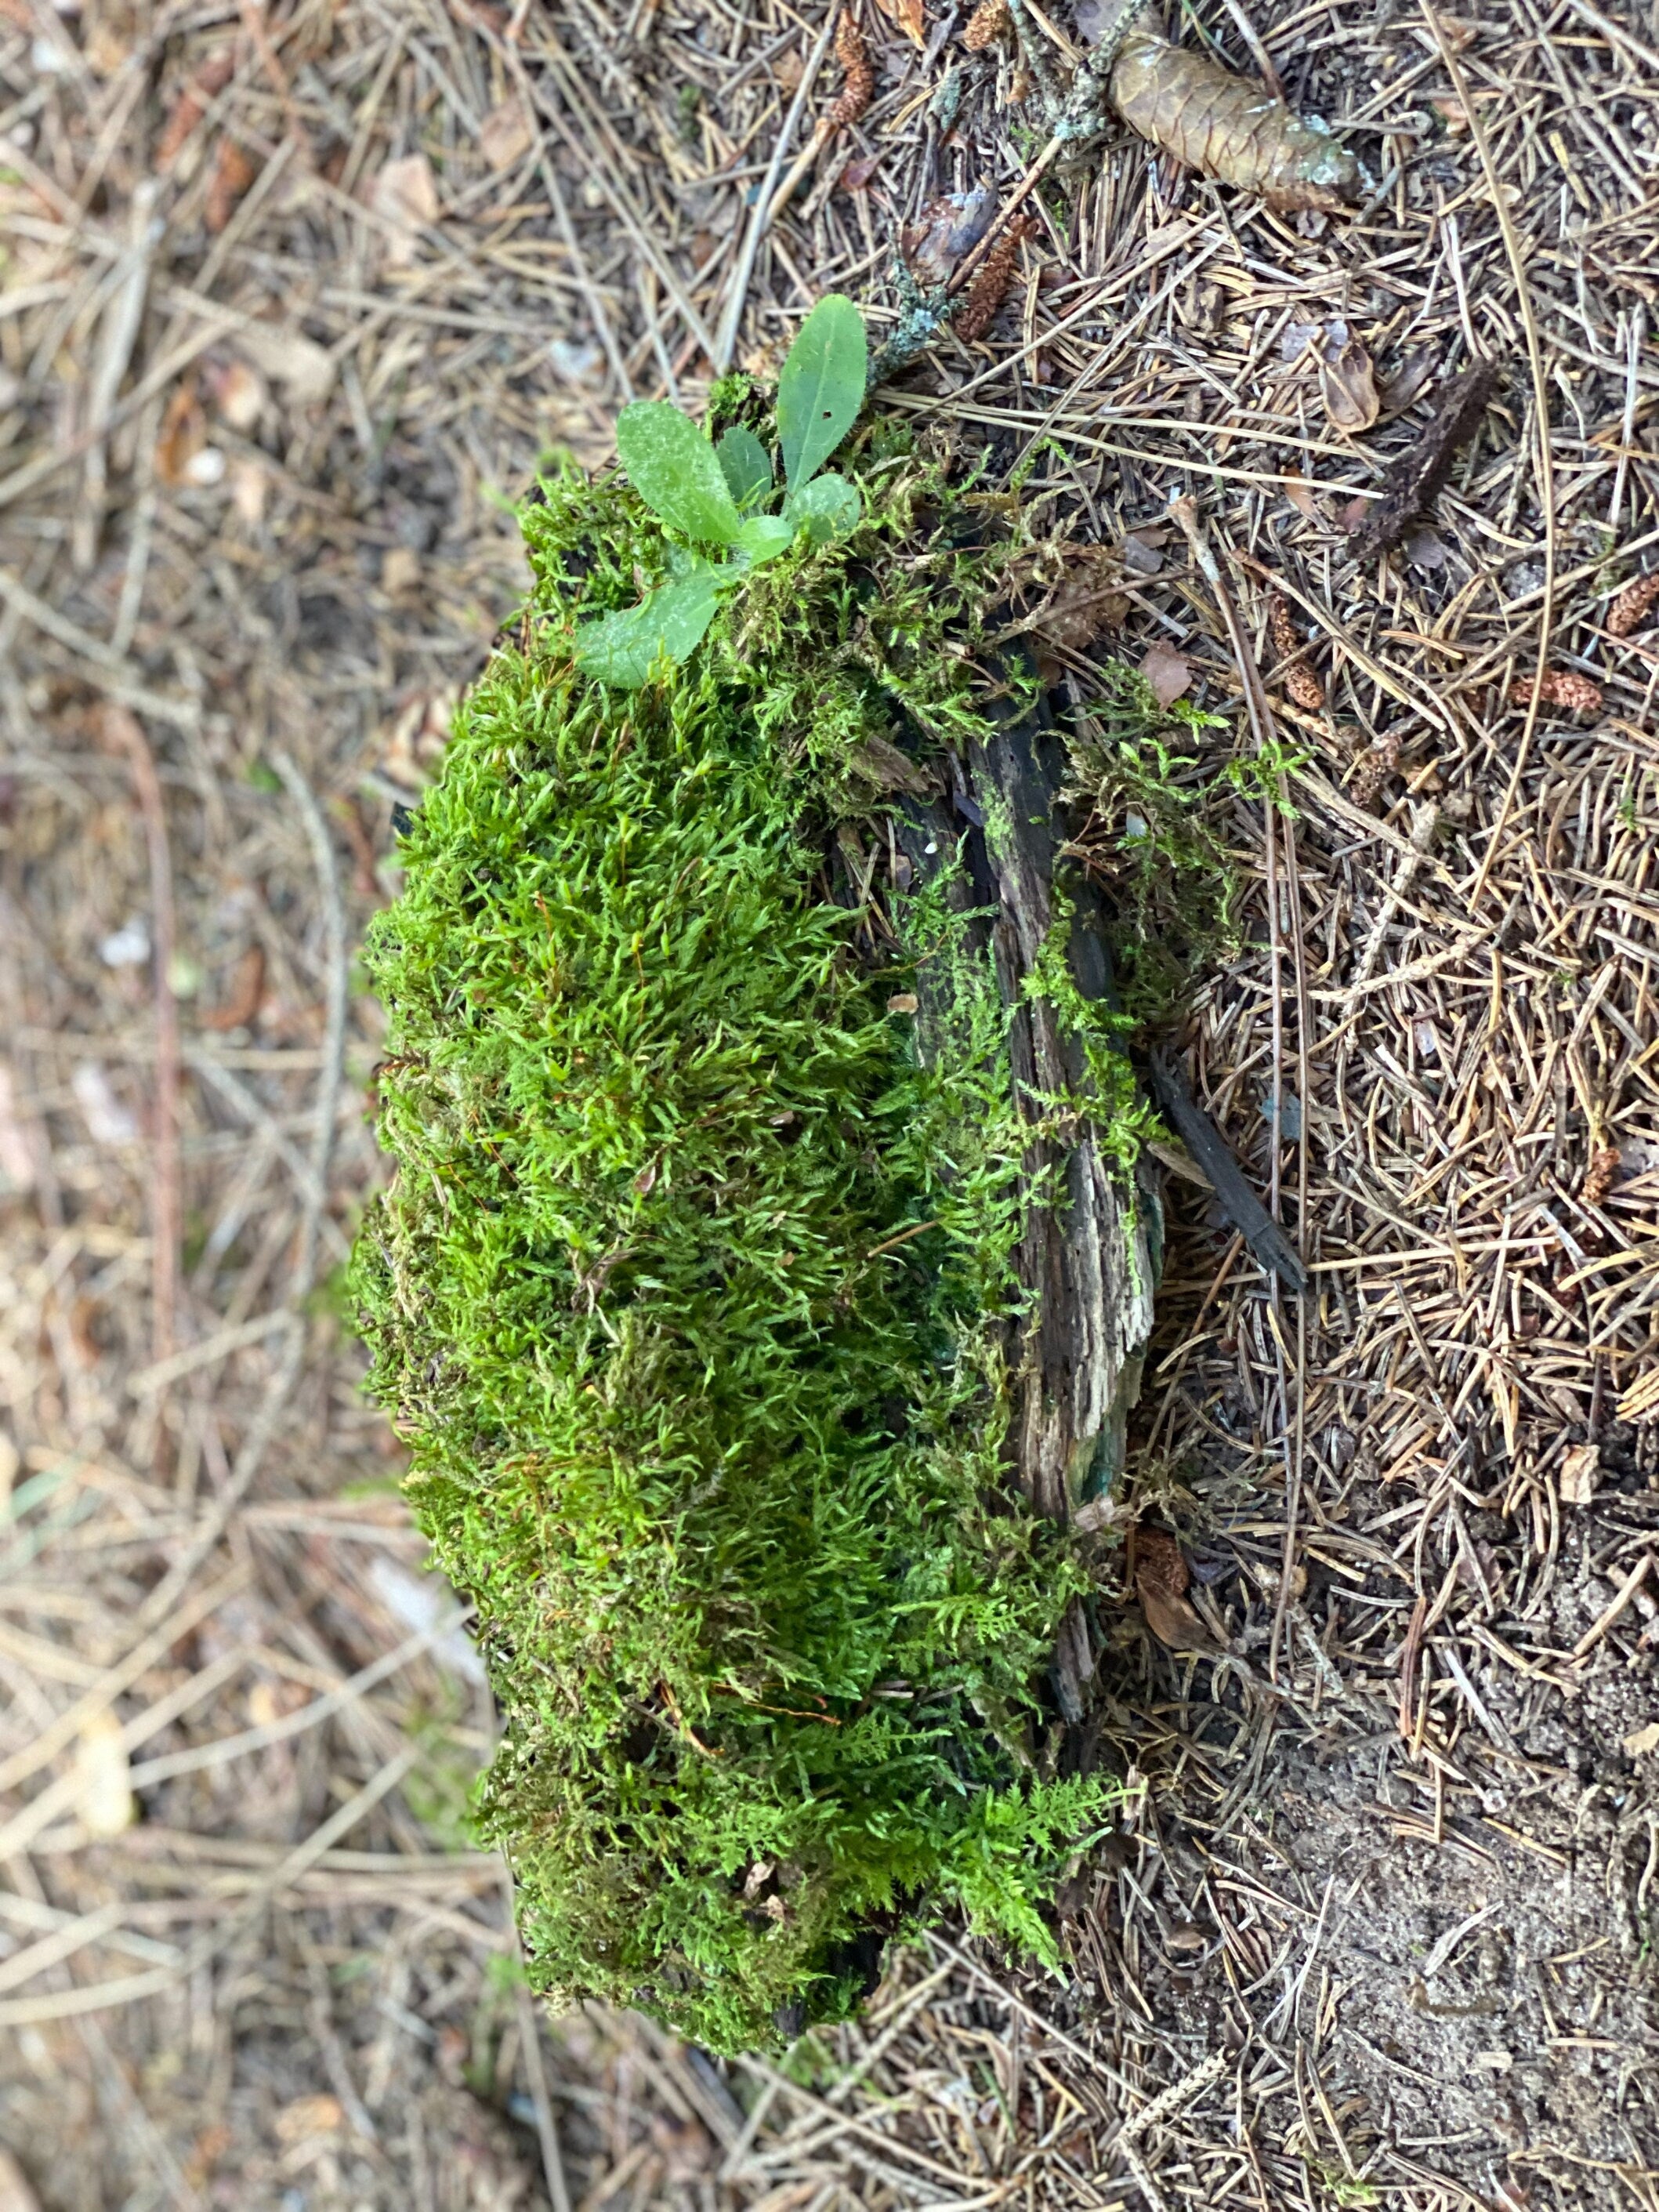 Moss Covered Log, Mossy Log, 8 Inches Long by 3.5 Inches Wide and 2.5 Inches High